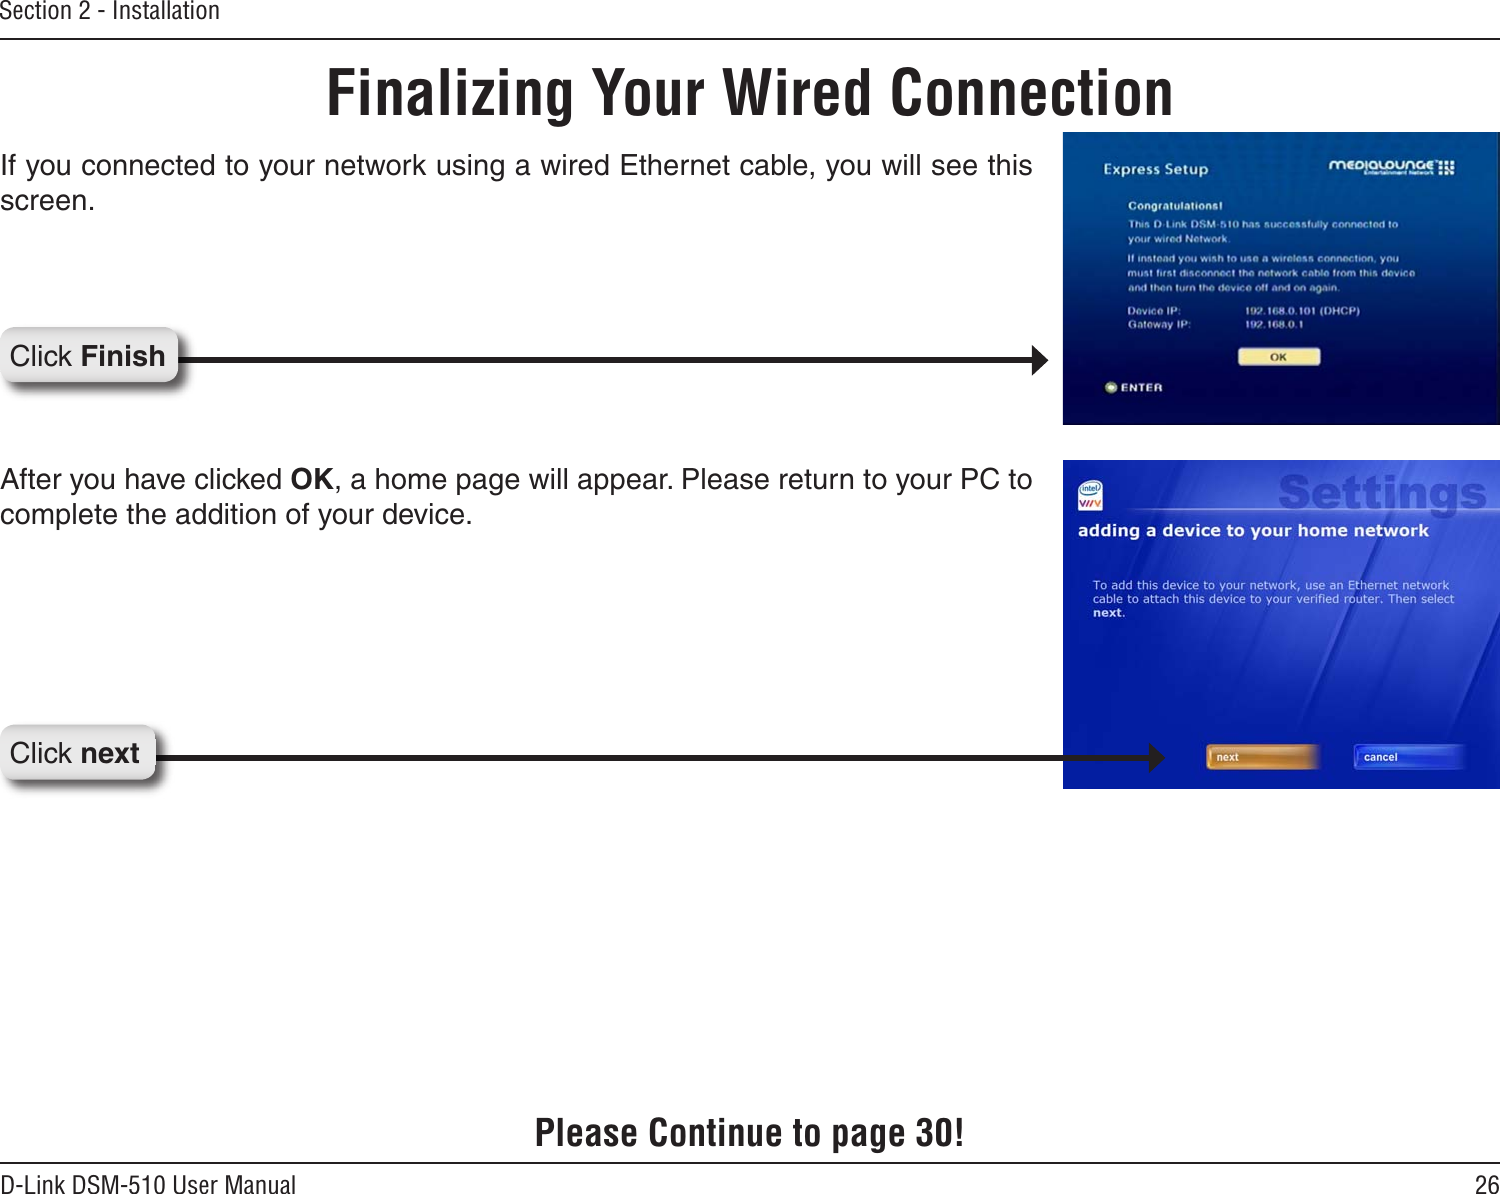 26D-Link DSM-510 User ManualSection 2 - InstallationIf you connected to your network using a wired Ethernet cable, you will see this screen.Finalizing Your Wired ConnectionClick FinishClick nextAfter you have clicked OK, a home page will appear. Please return to your PC to complete the addition of your device. Please Continue to page 30!